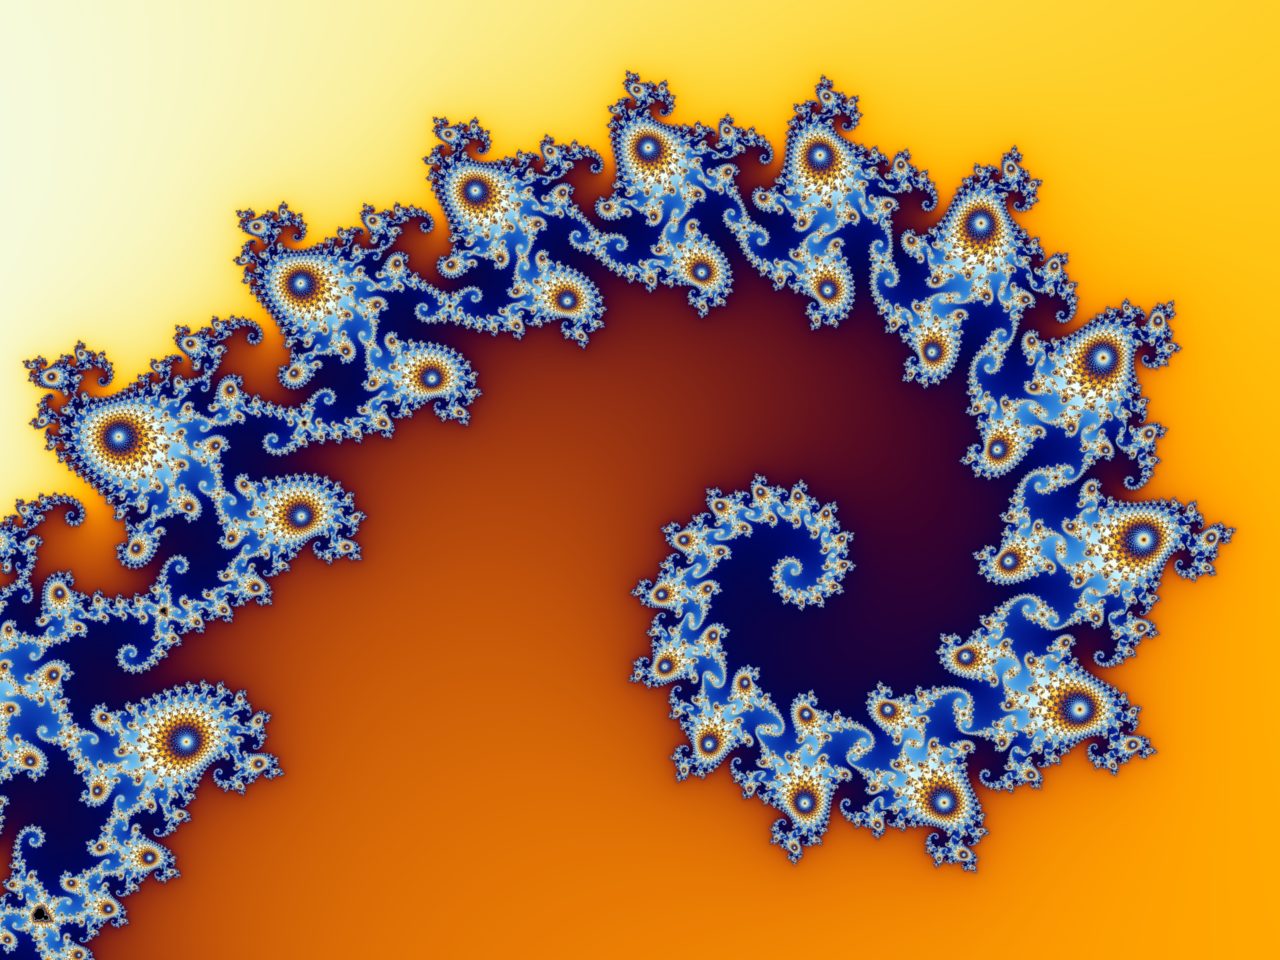 Created by Wolfgang Beyer with the program Ultra Fractal 3.